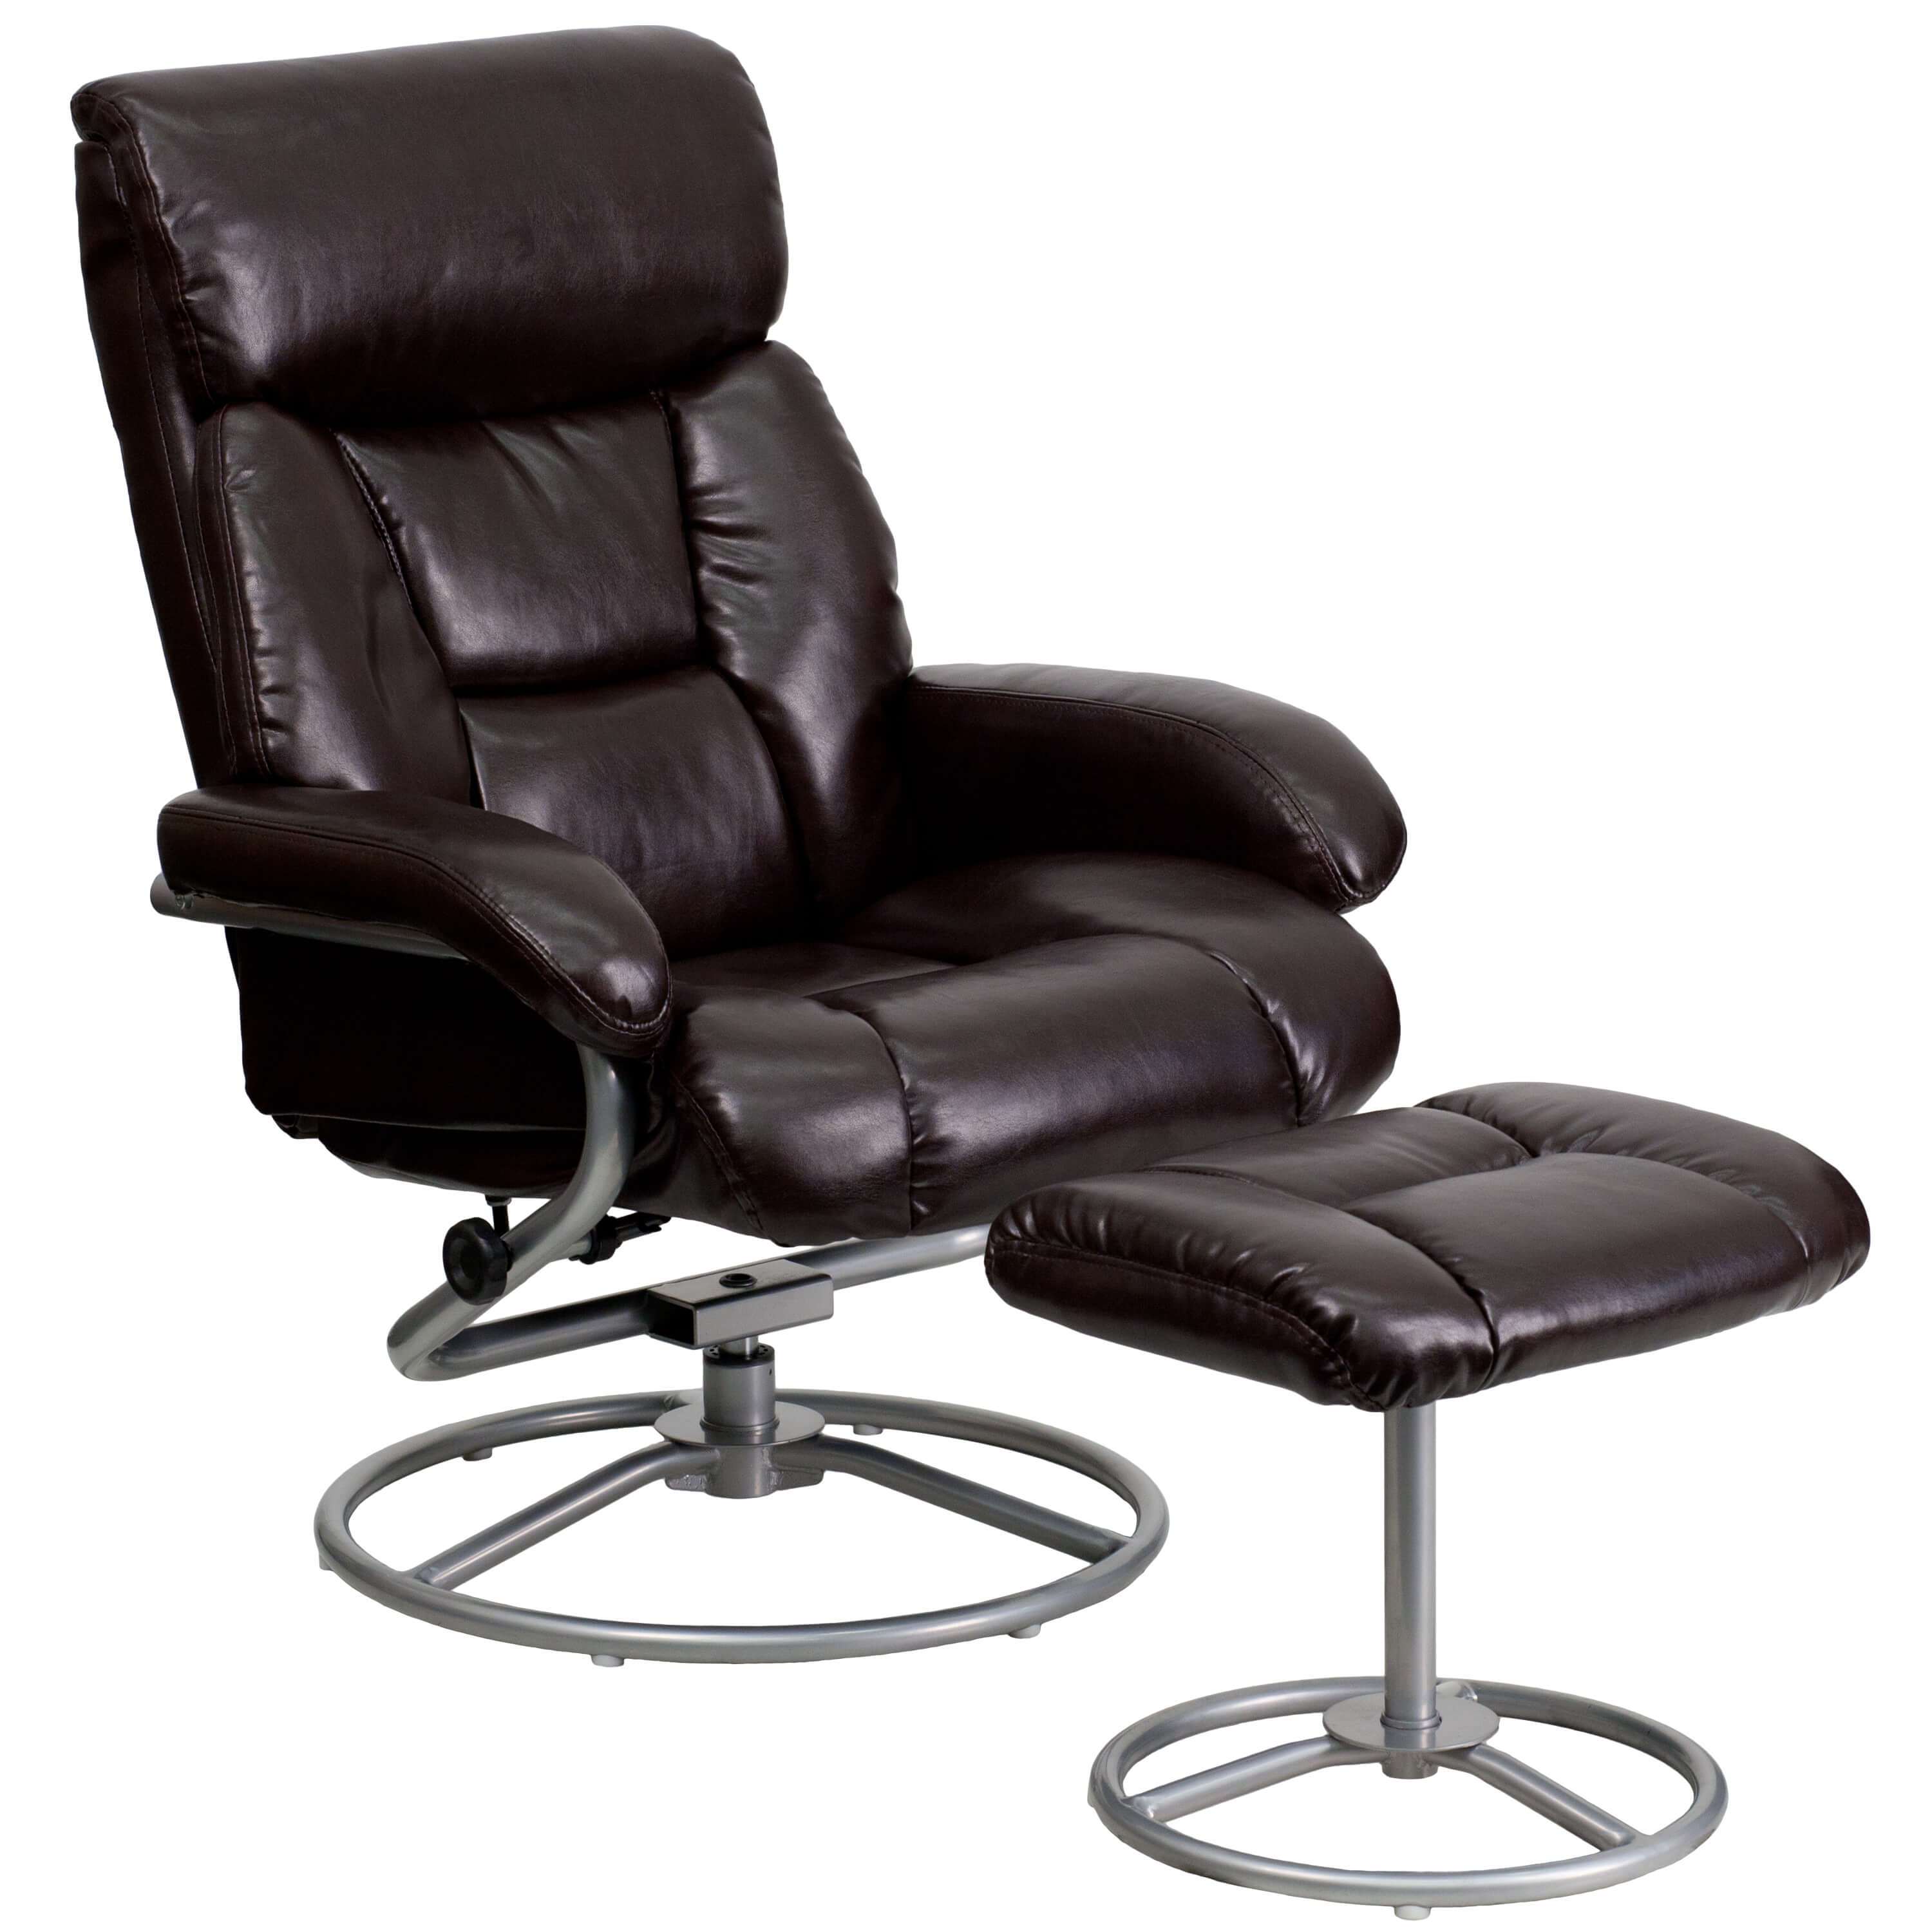 contemporary-recliners-contemporary-leather-recliners.jpg